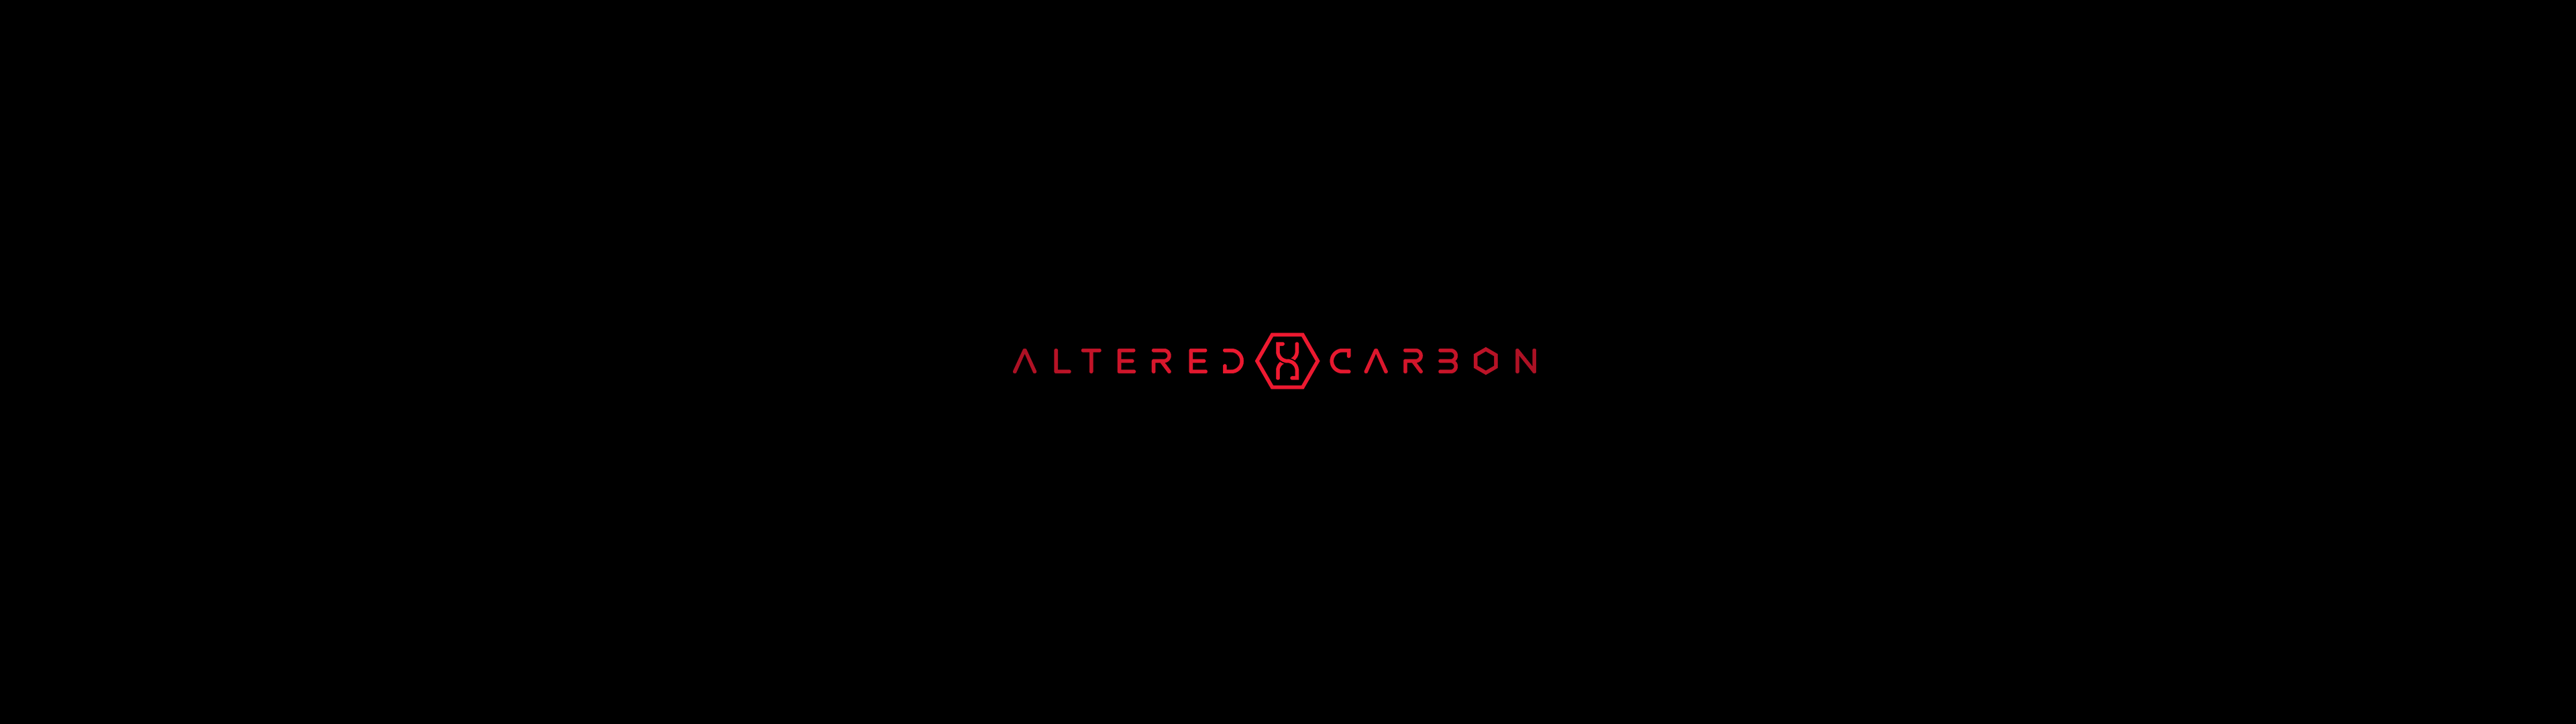 General 3840x1080 Altered Carbon multiple display dual monitors